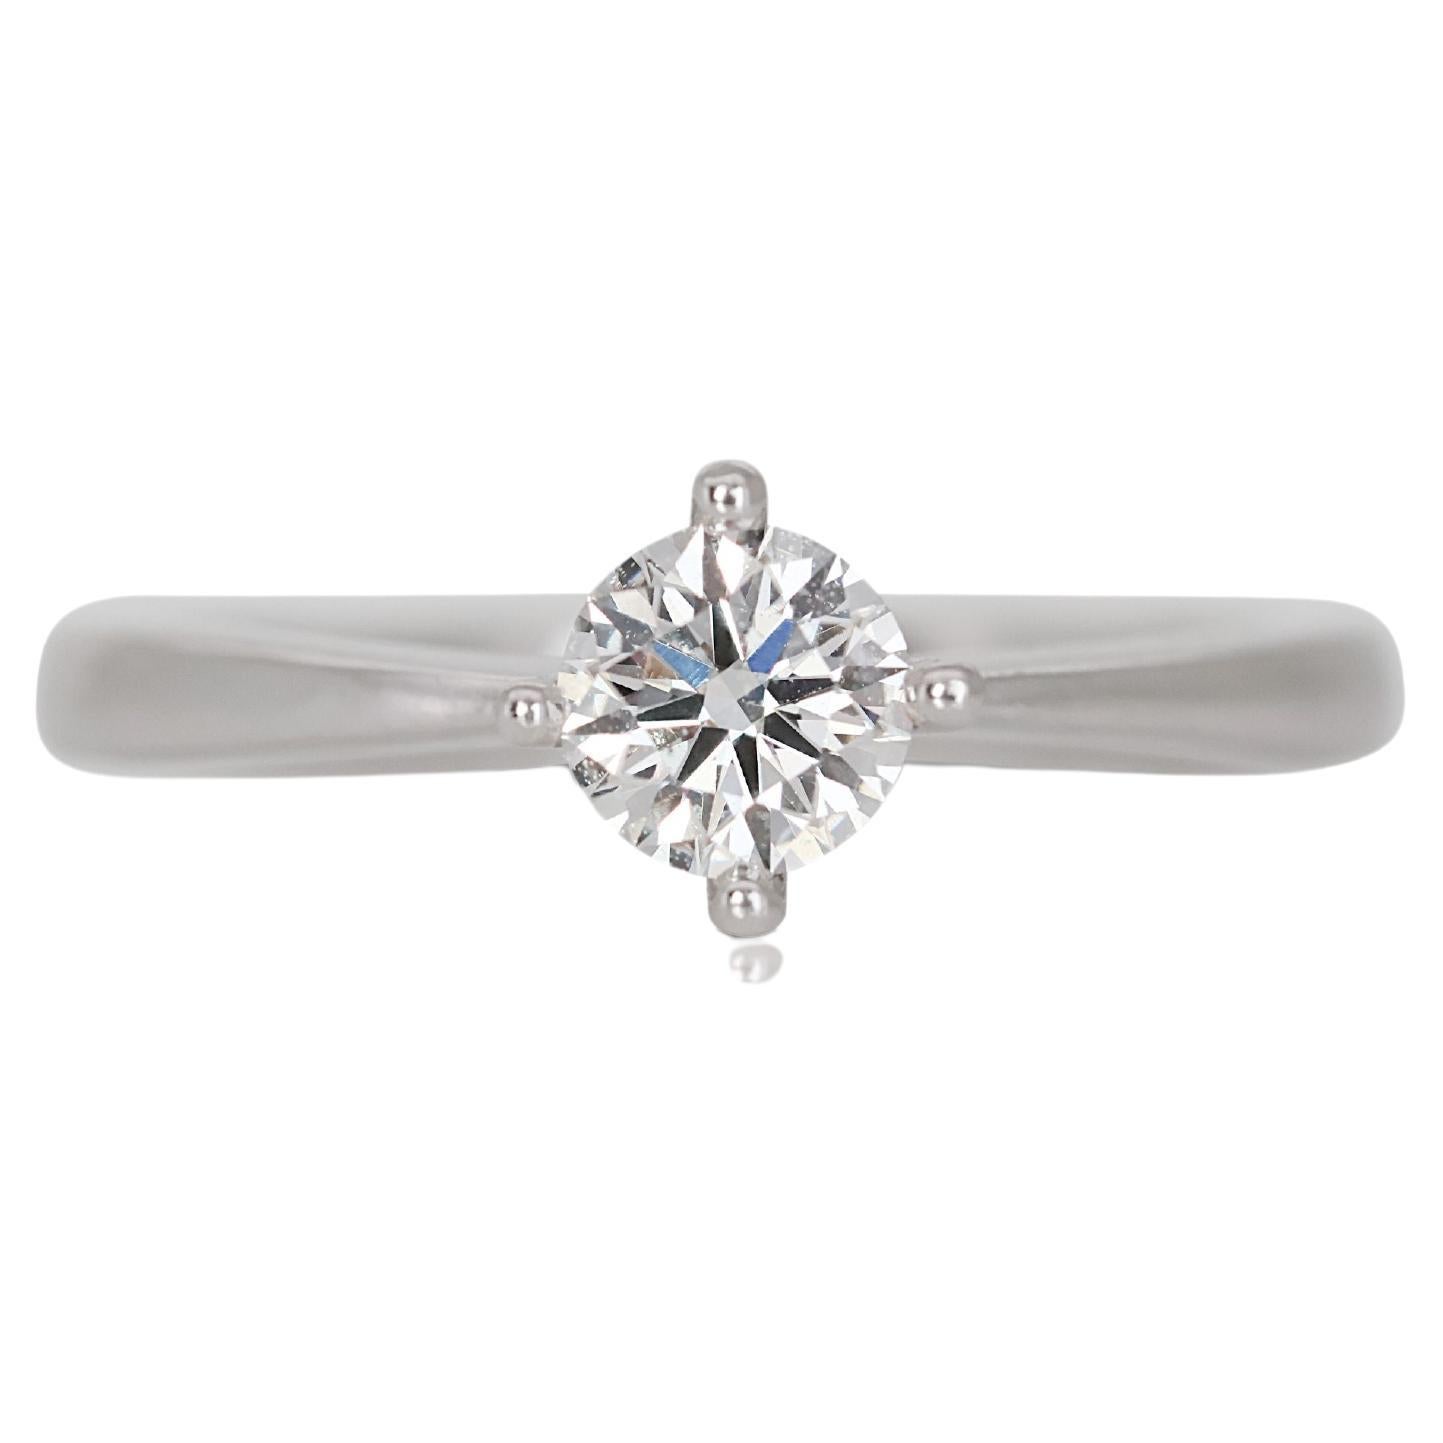 Beautiful 0.32ct Solitaire Diamond Ring in 18K White Gold

The focal point of this ring is a remarkable solitaire diamond, weighing 0.32 carats, known for its exquisite clarity and dazzling brilliance. This diamond is thoughtfully set in an elegant